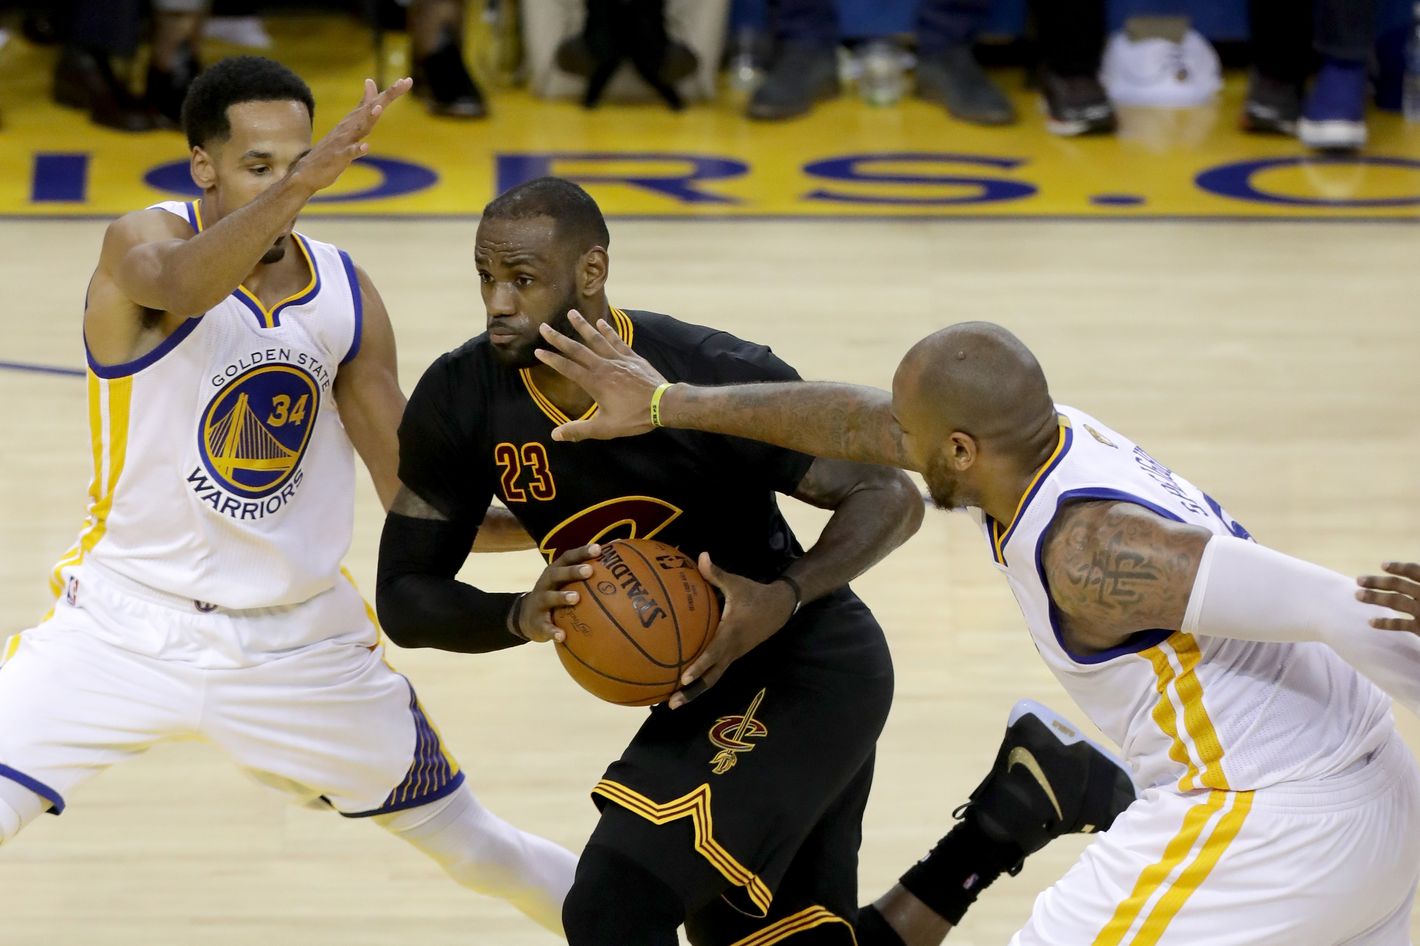 The Latest: Cavaliers, Warriors tied 61-61 at halftime